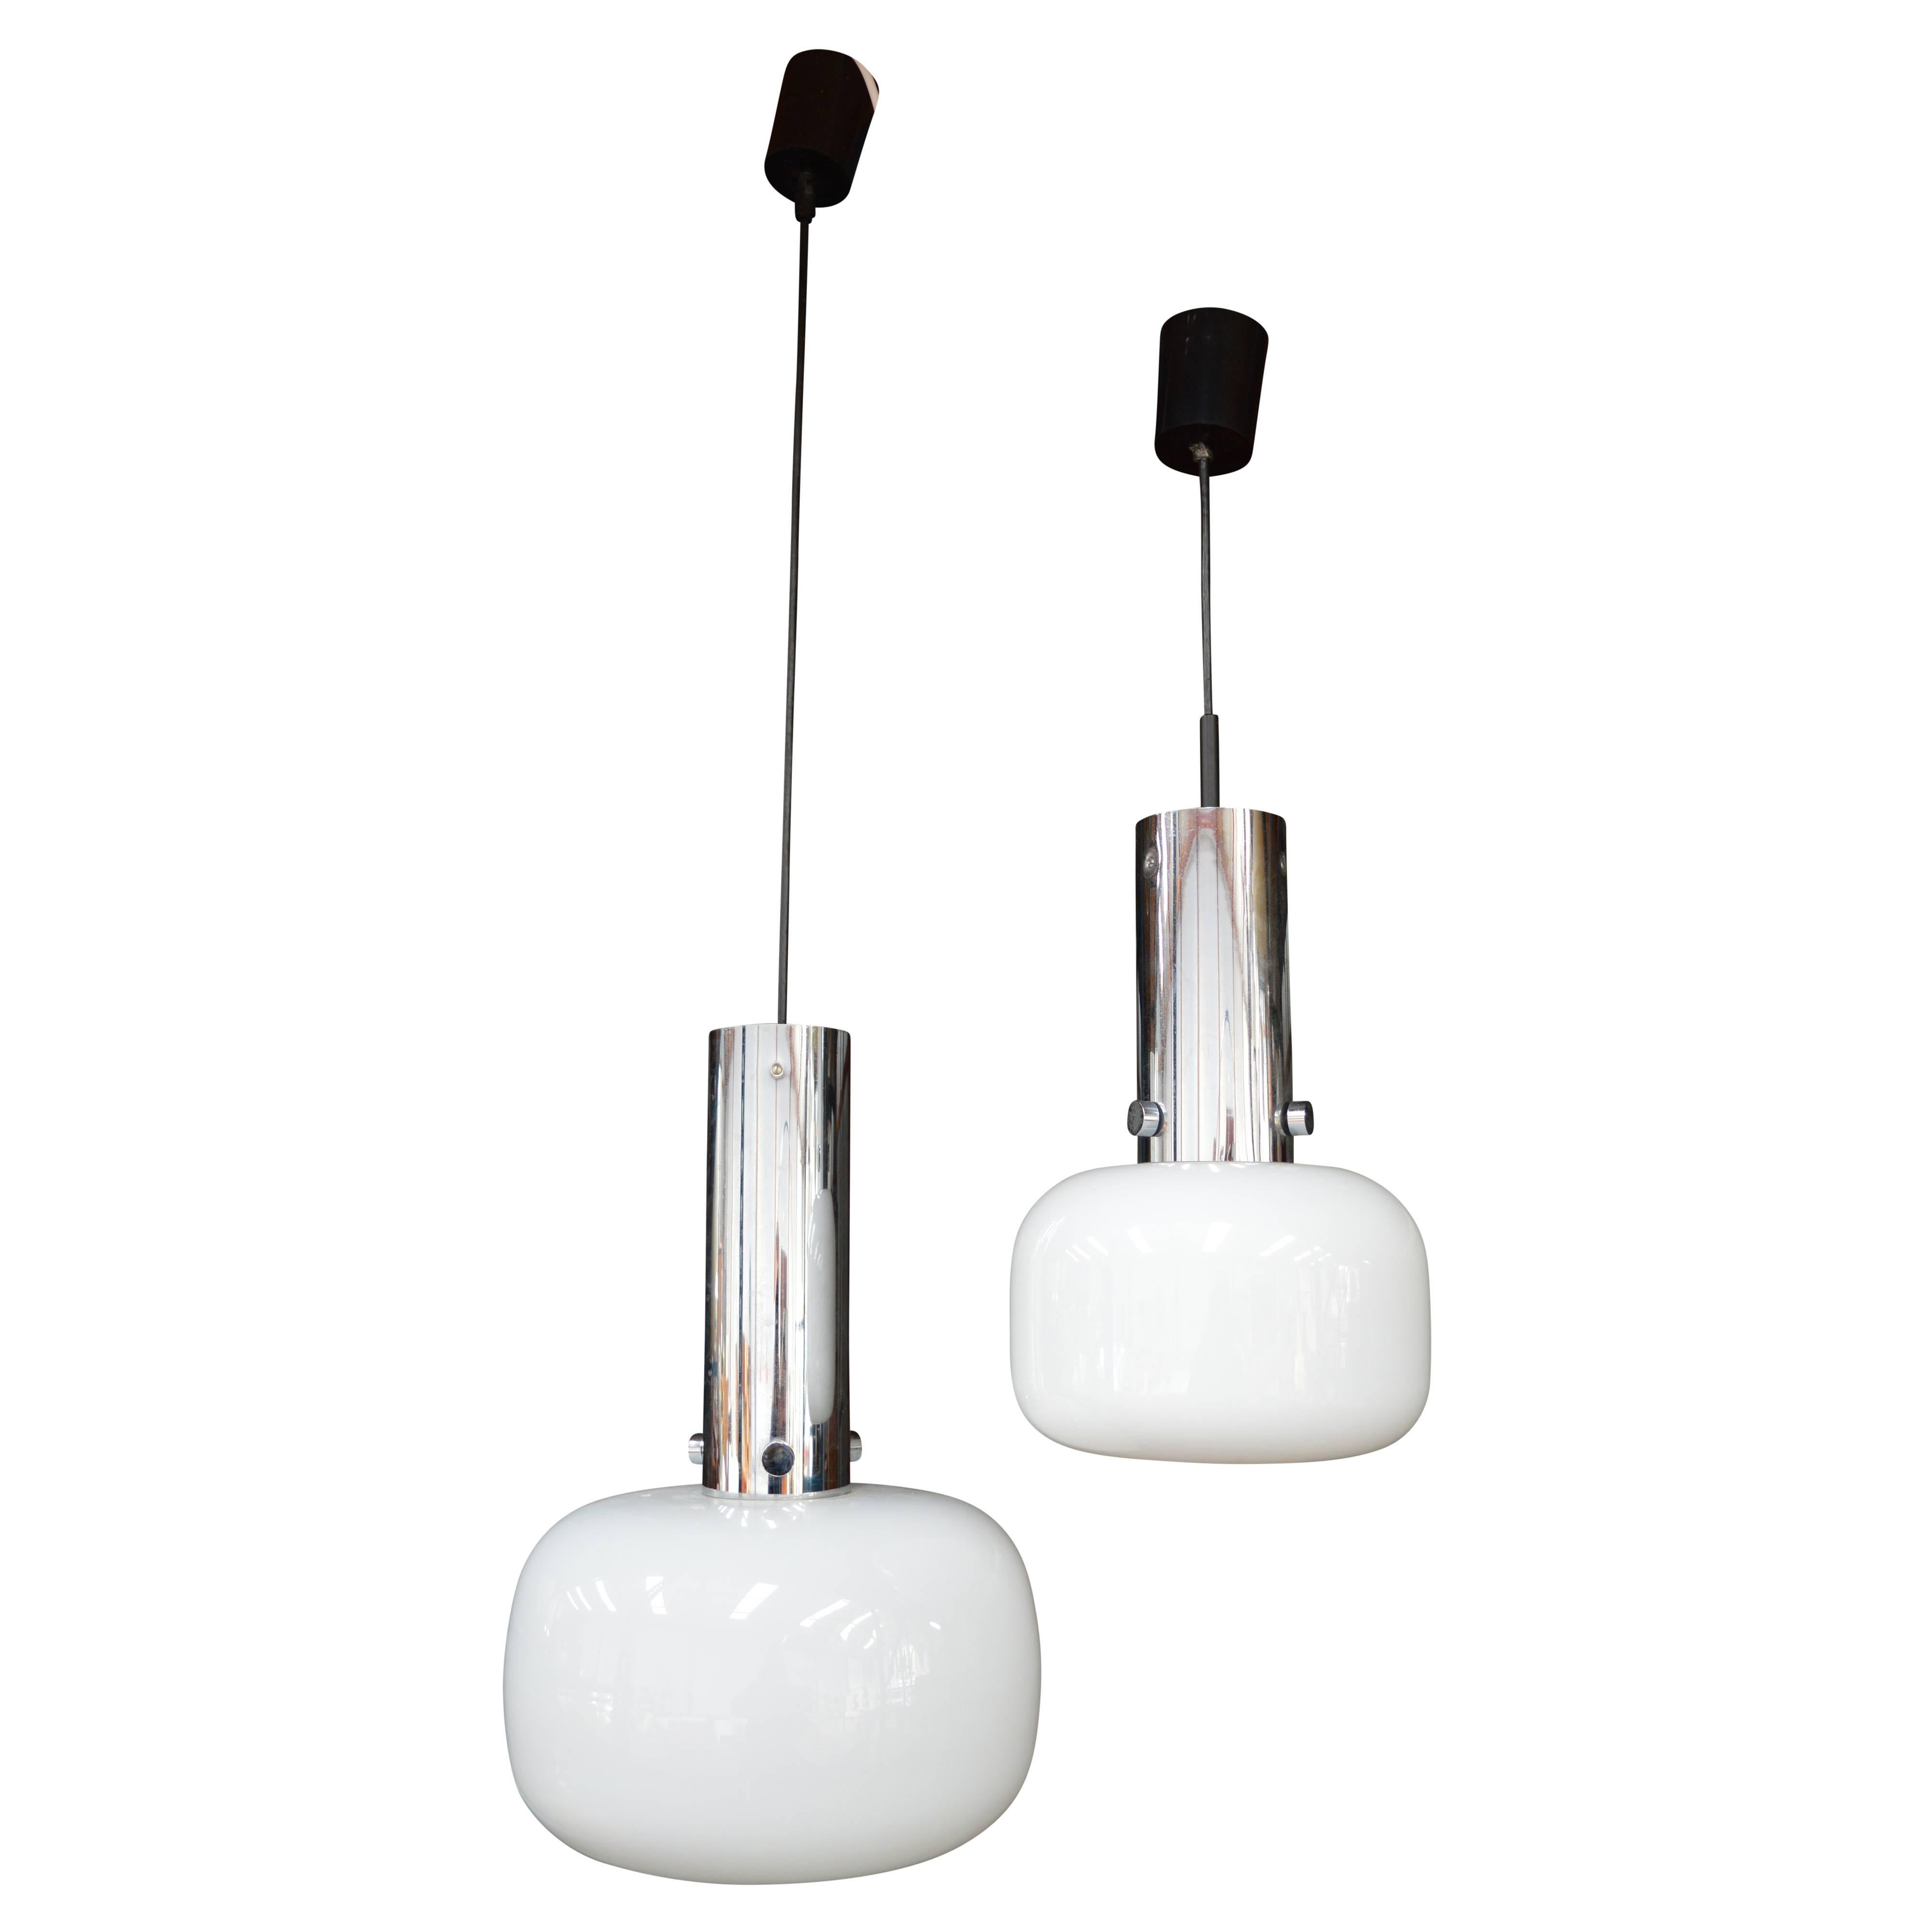 Pair of space-age Glashütte Limburg pendant lamps made of opaline glass and chrome, Germany, 1970s.
The E27 socket is recessed far into the chrome tube so that the light source itself isn't visible thereby providing an indirect down light in the